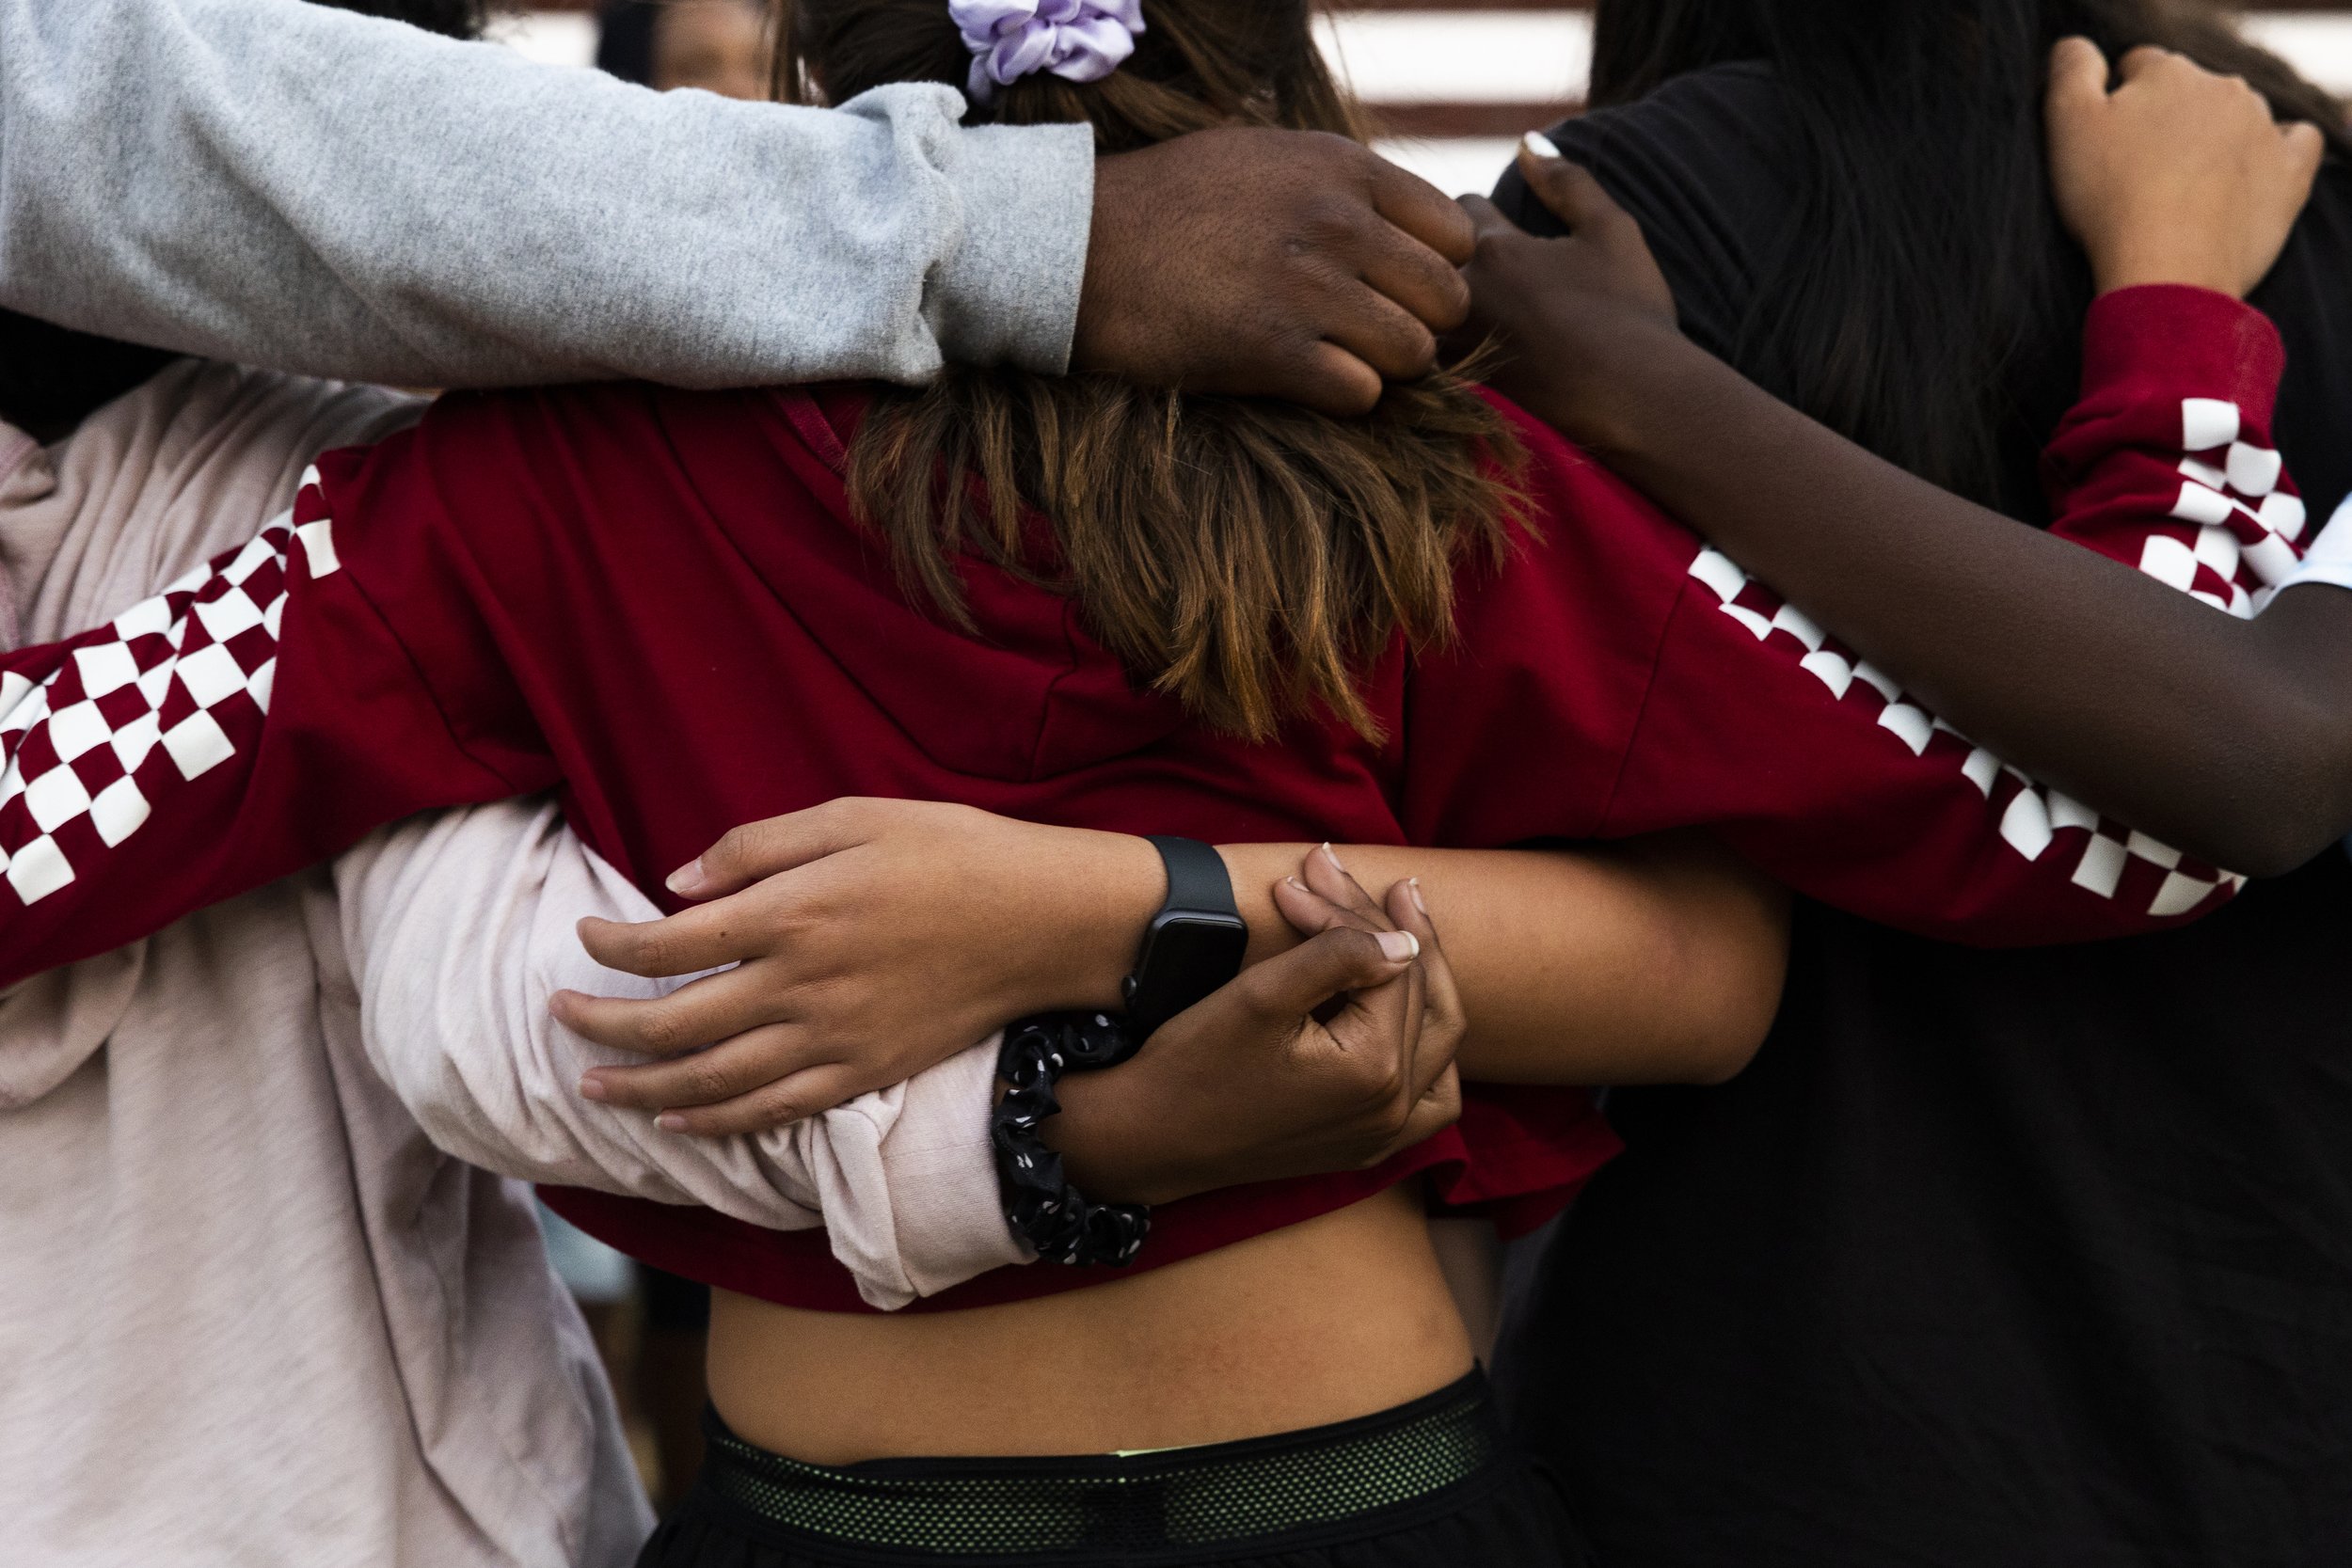  Campers and counselors link arms during Hashkiveinu, the daily goodnight prayer, at Camp Bechol Lashon in Santa Rosa, California on August 7, 2021. (On assignment for NPR) 